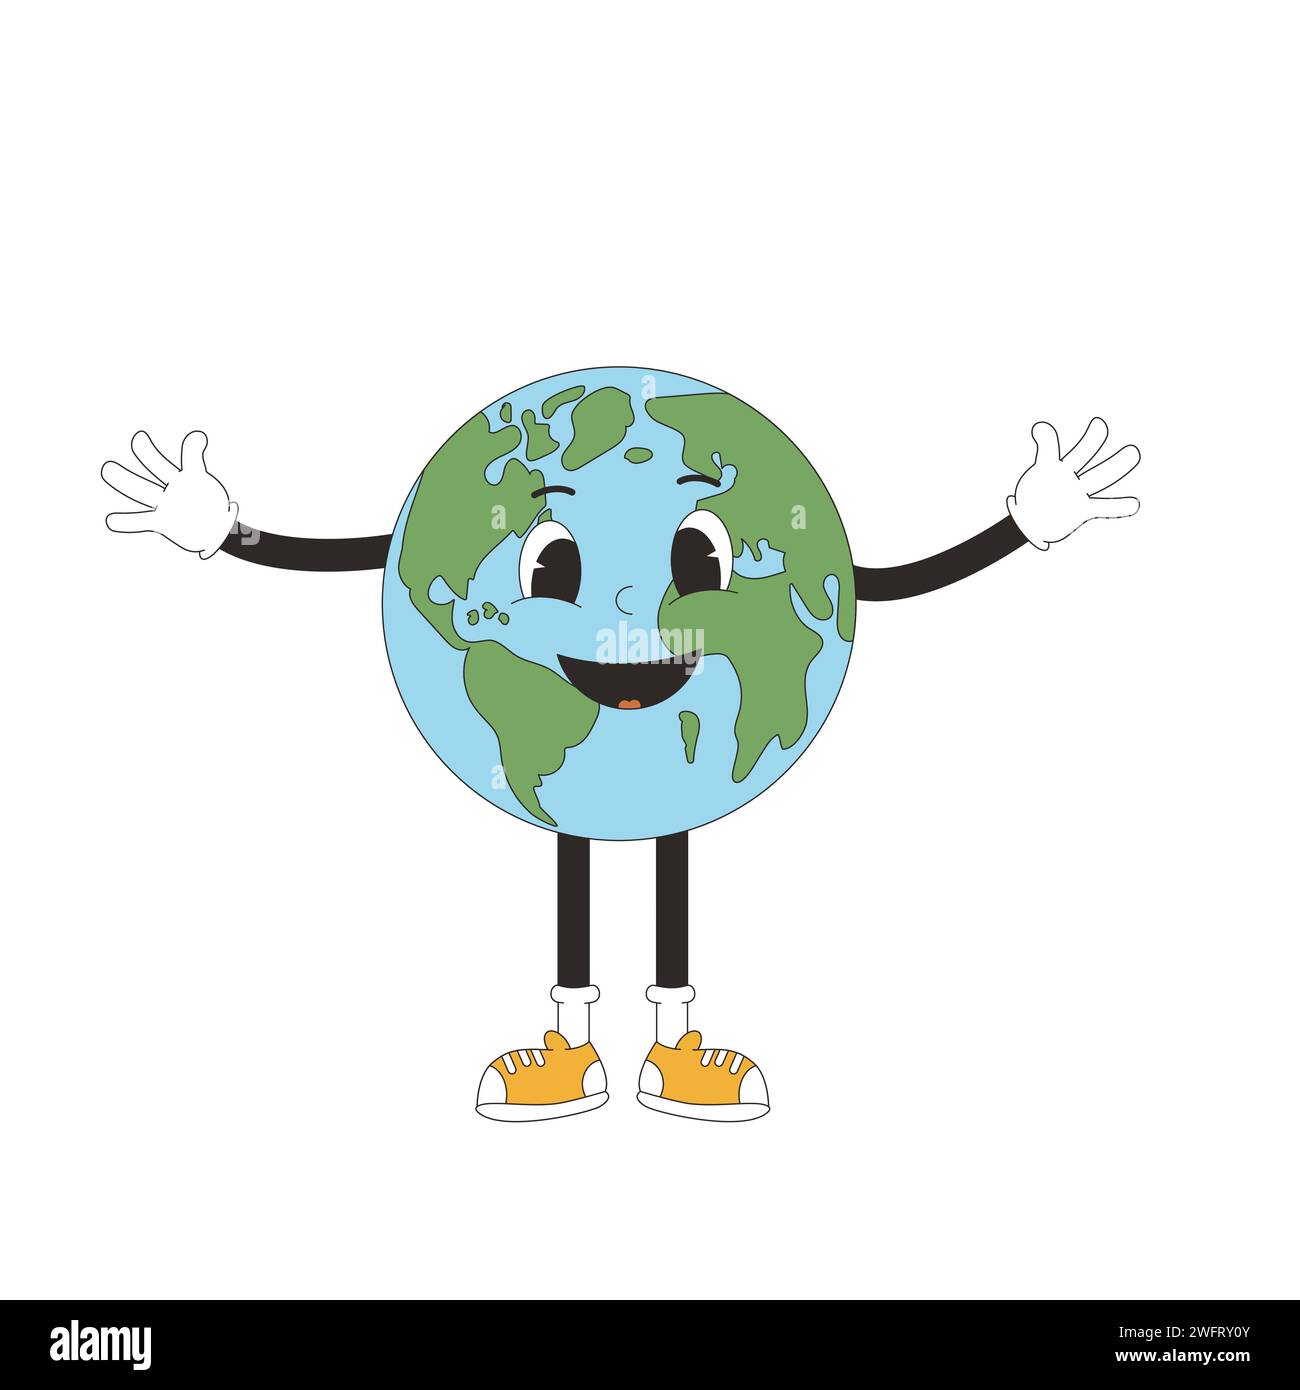 Earth mascot in retro style. Cute planet character isolated on white background. Vector globe with face illustration. Stock Vector